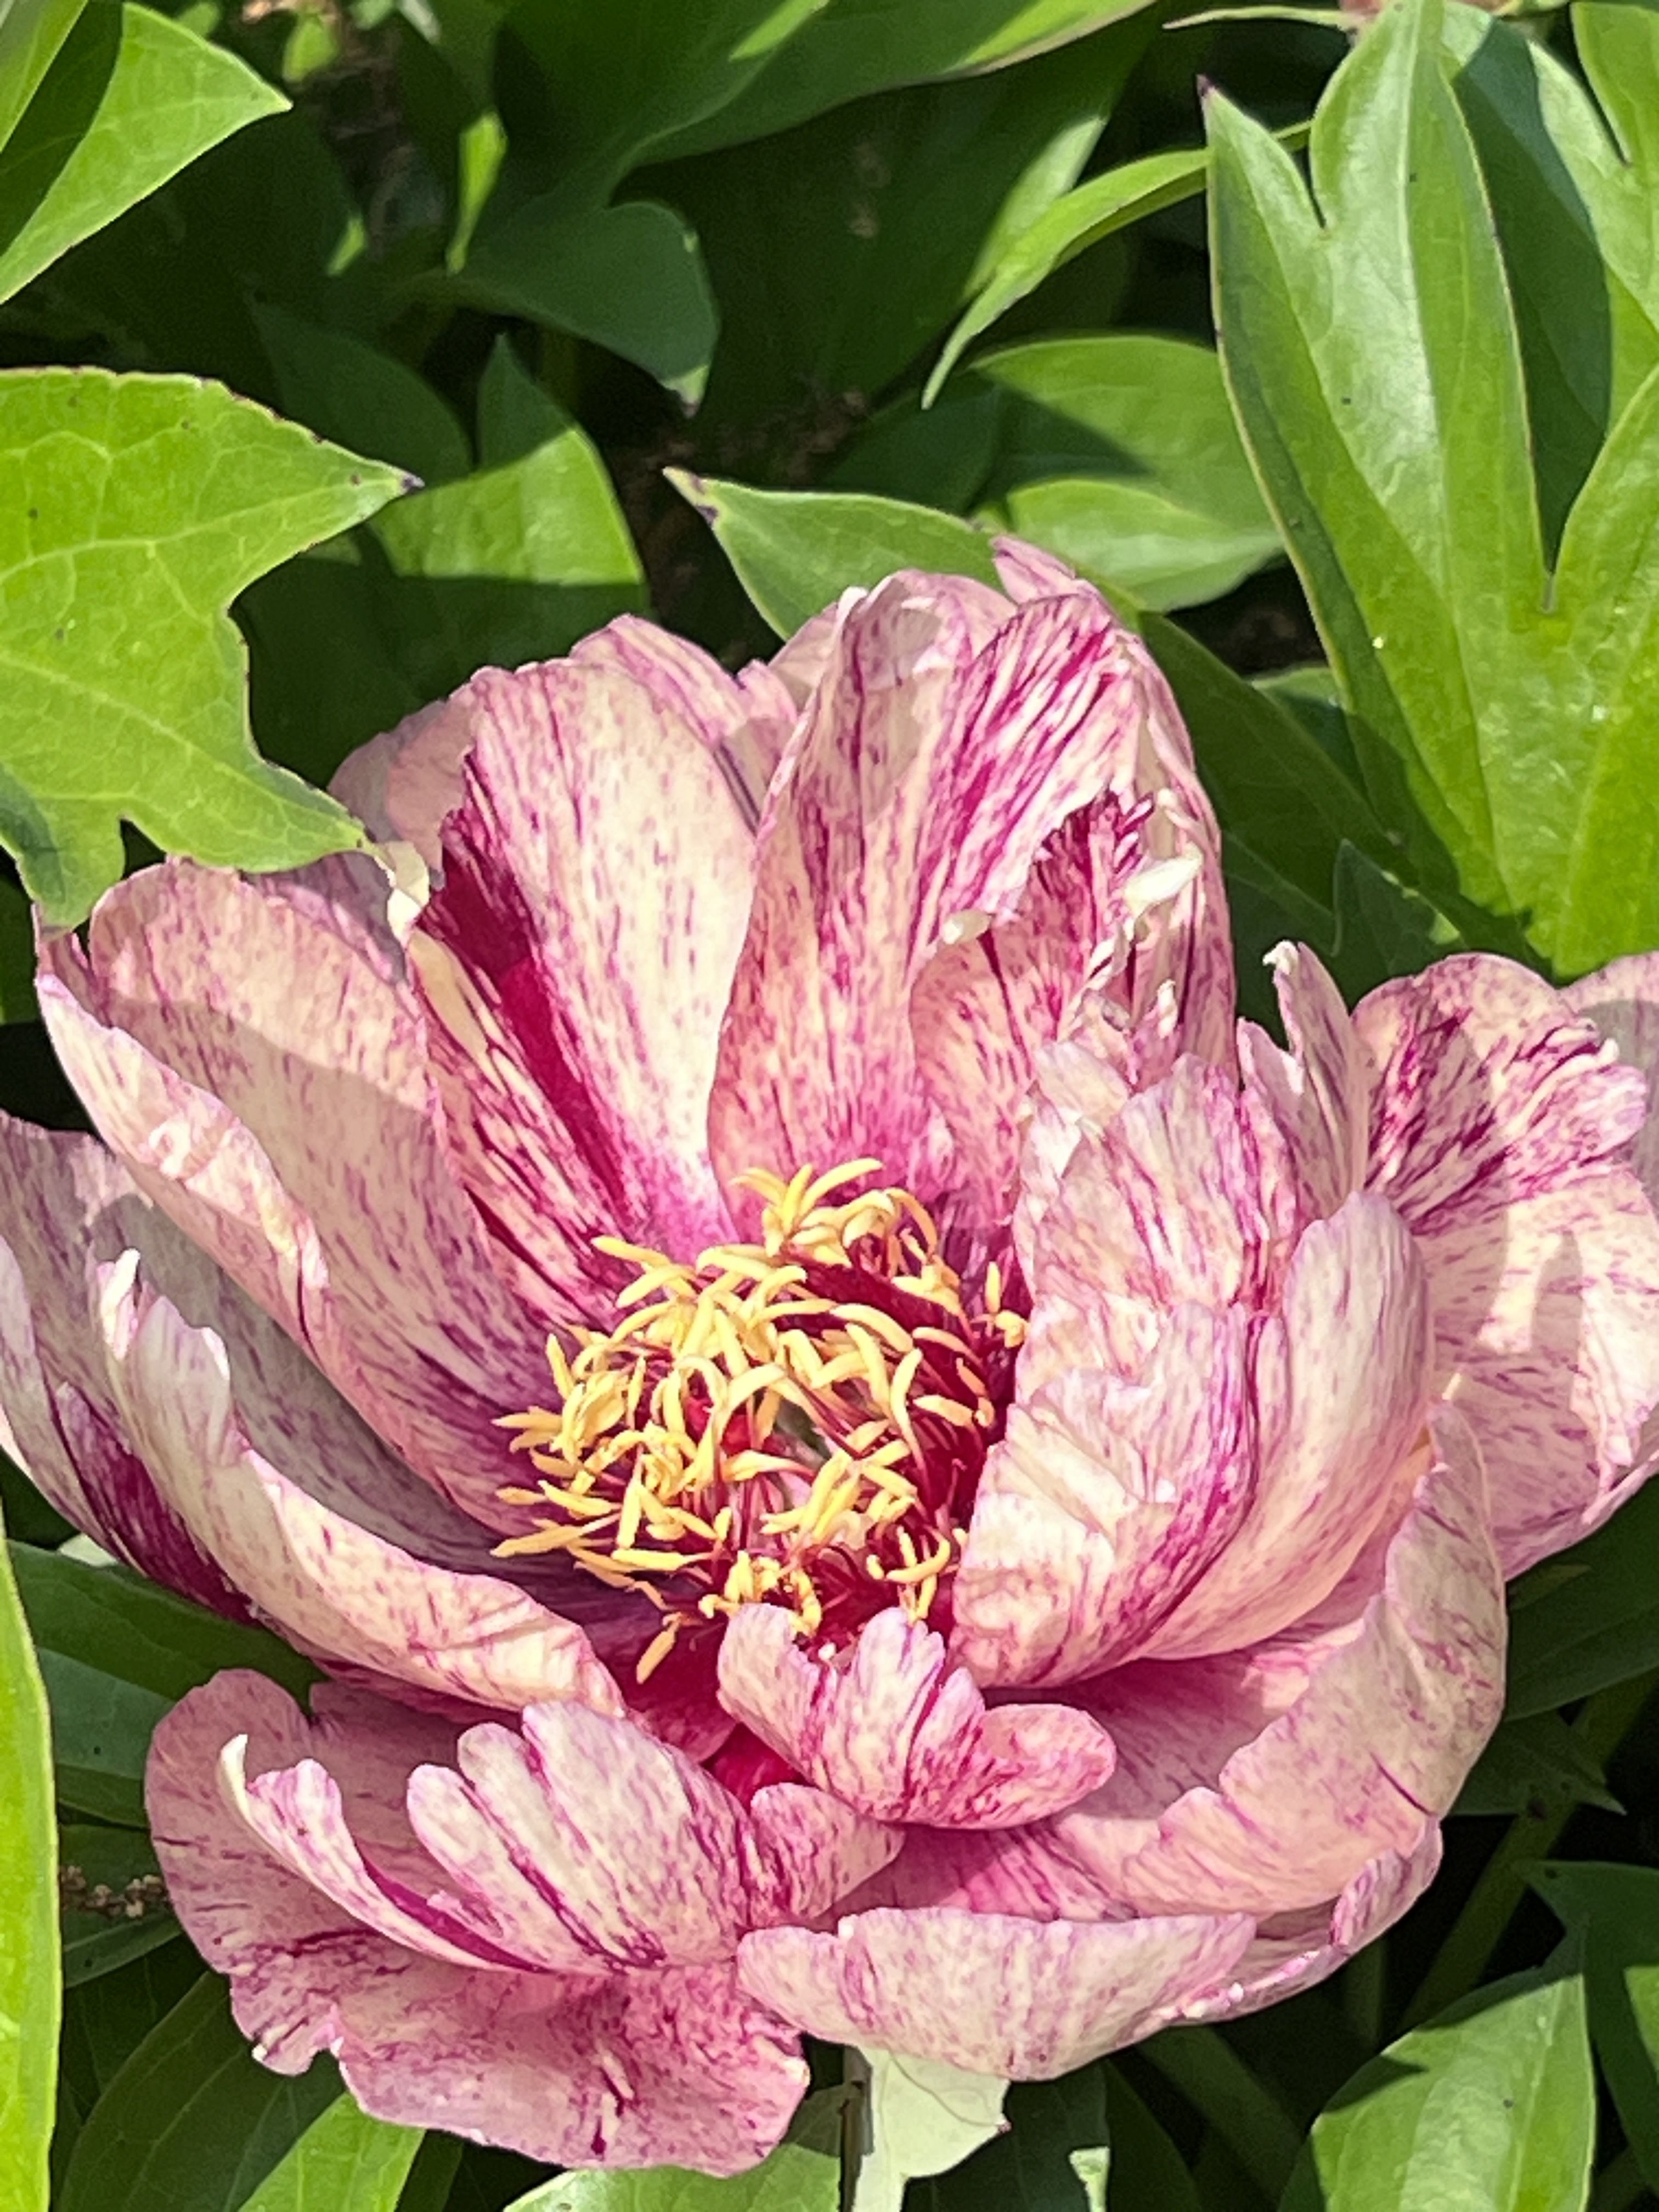 images/plants/paeonia/pae-all-that-jazz/pae-all-that-jazz-0008.JPG